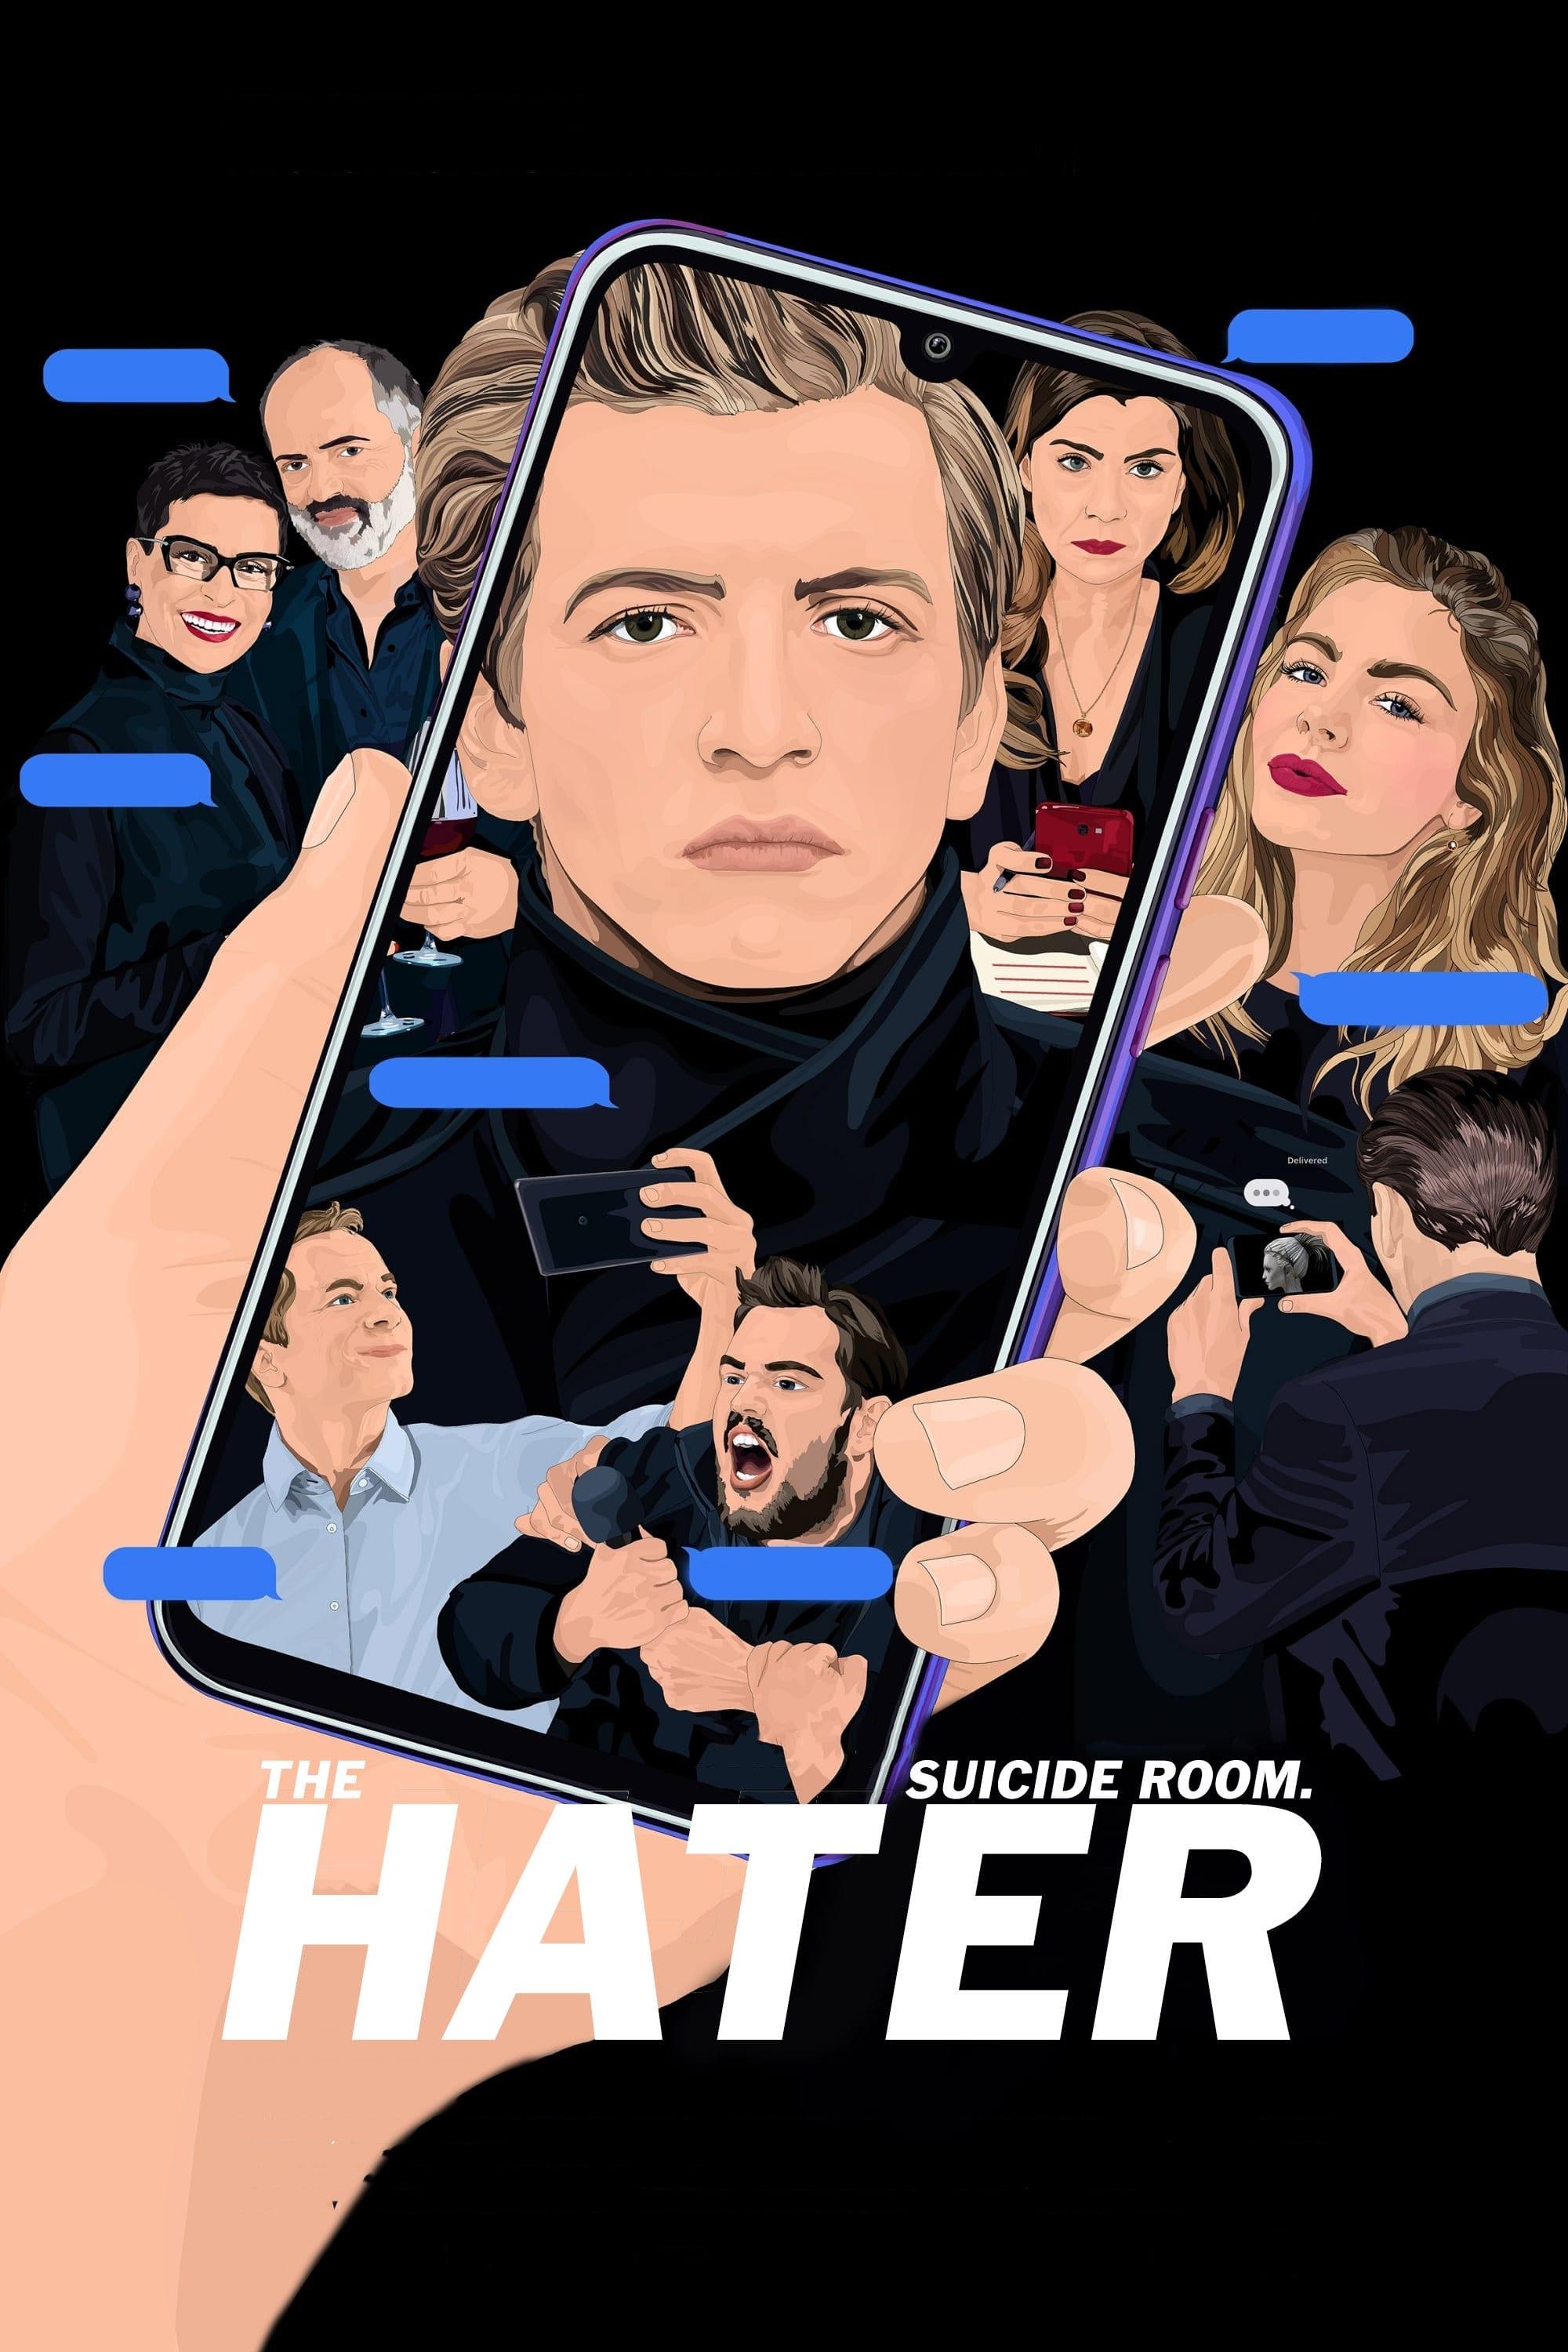 The Hater poster